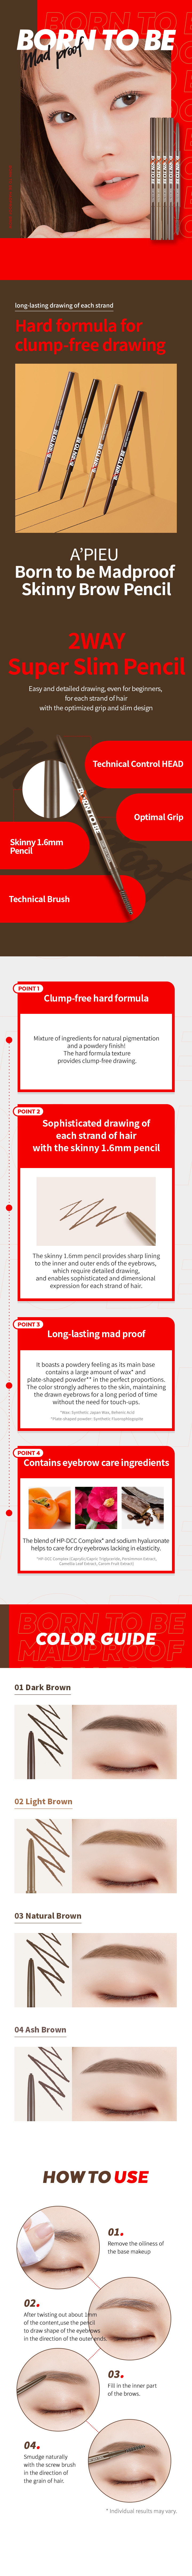 BORN TO BE MADPROOF Skinny Brow Pencil